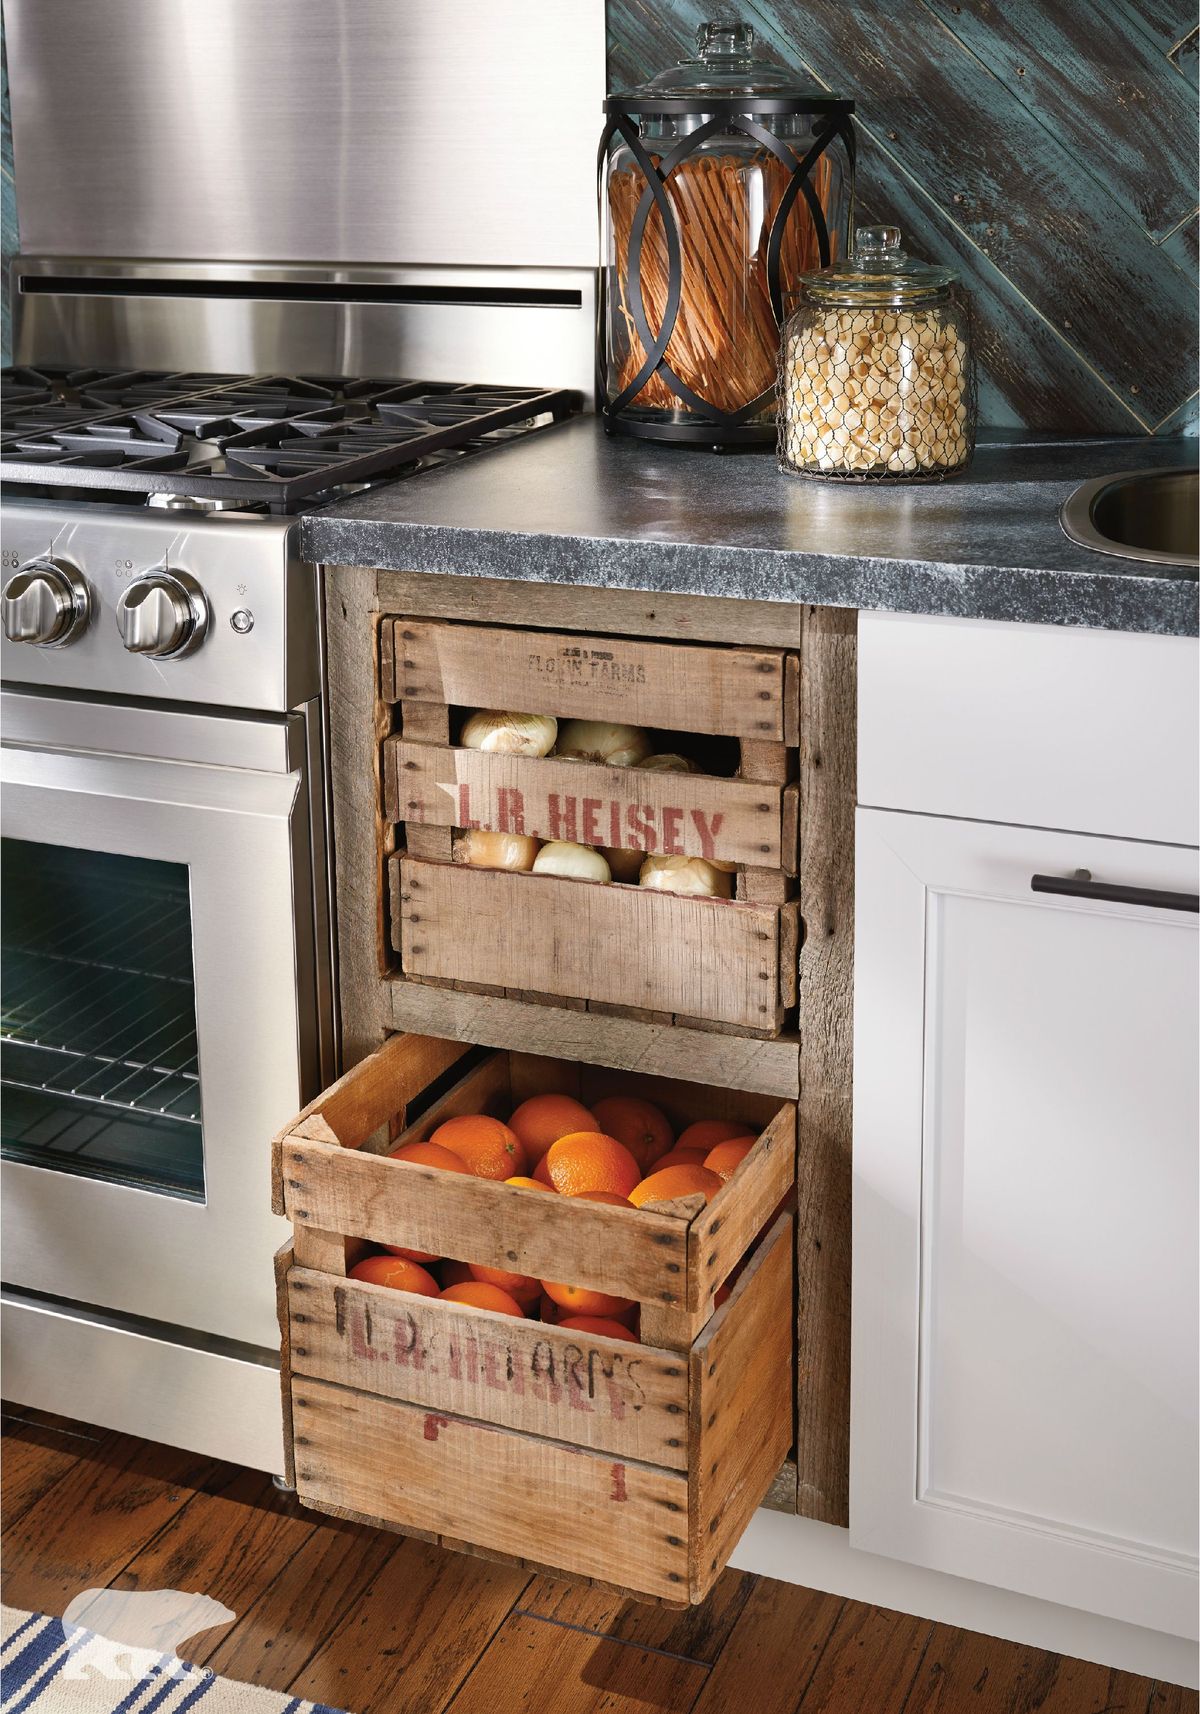 Practical and clever ideas for kitchen organization